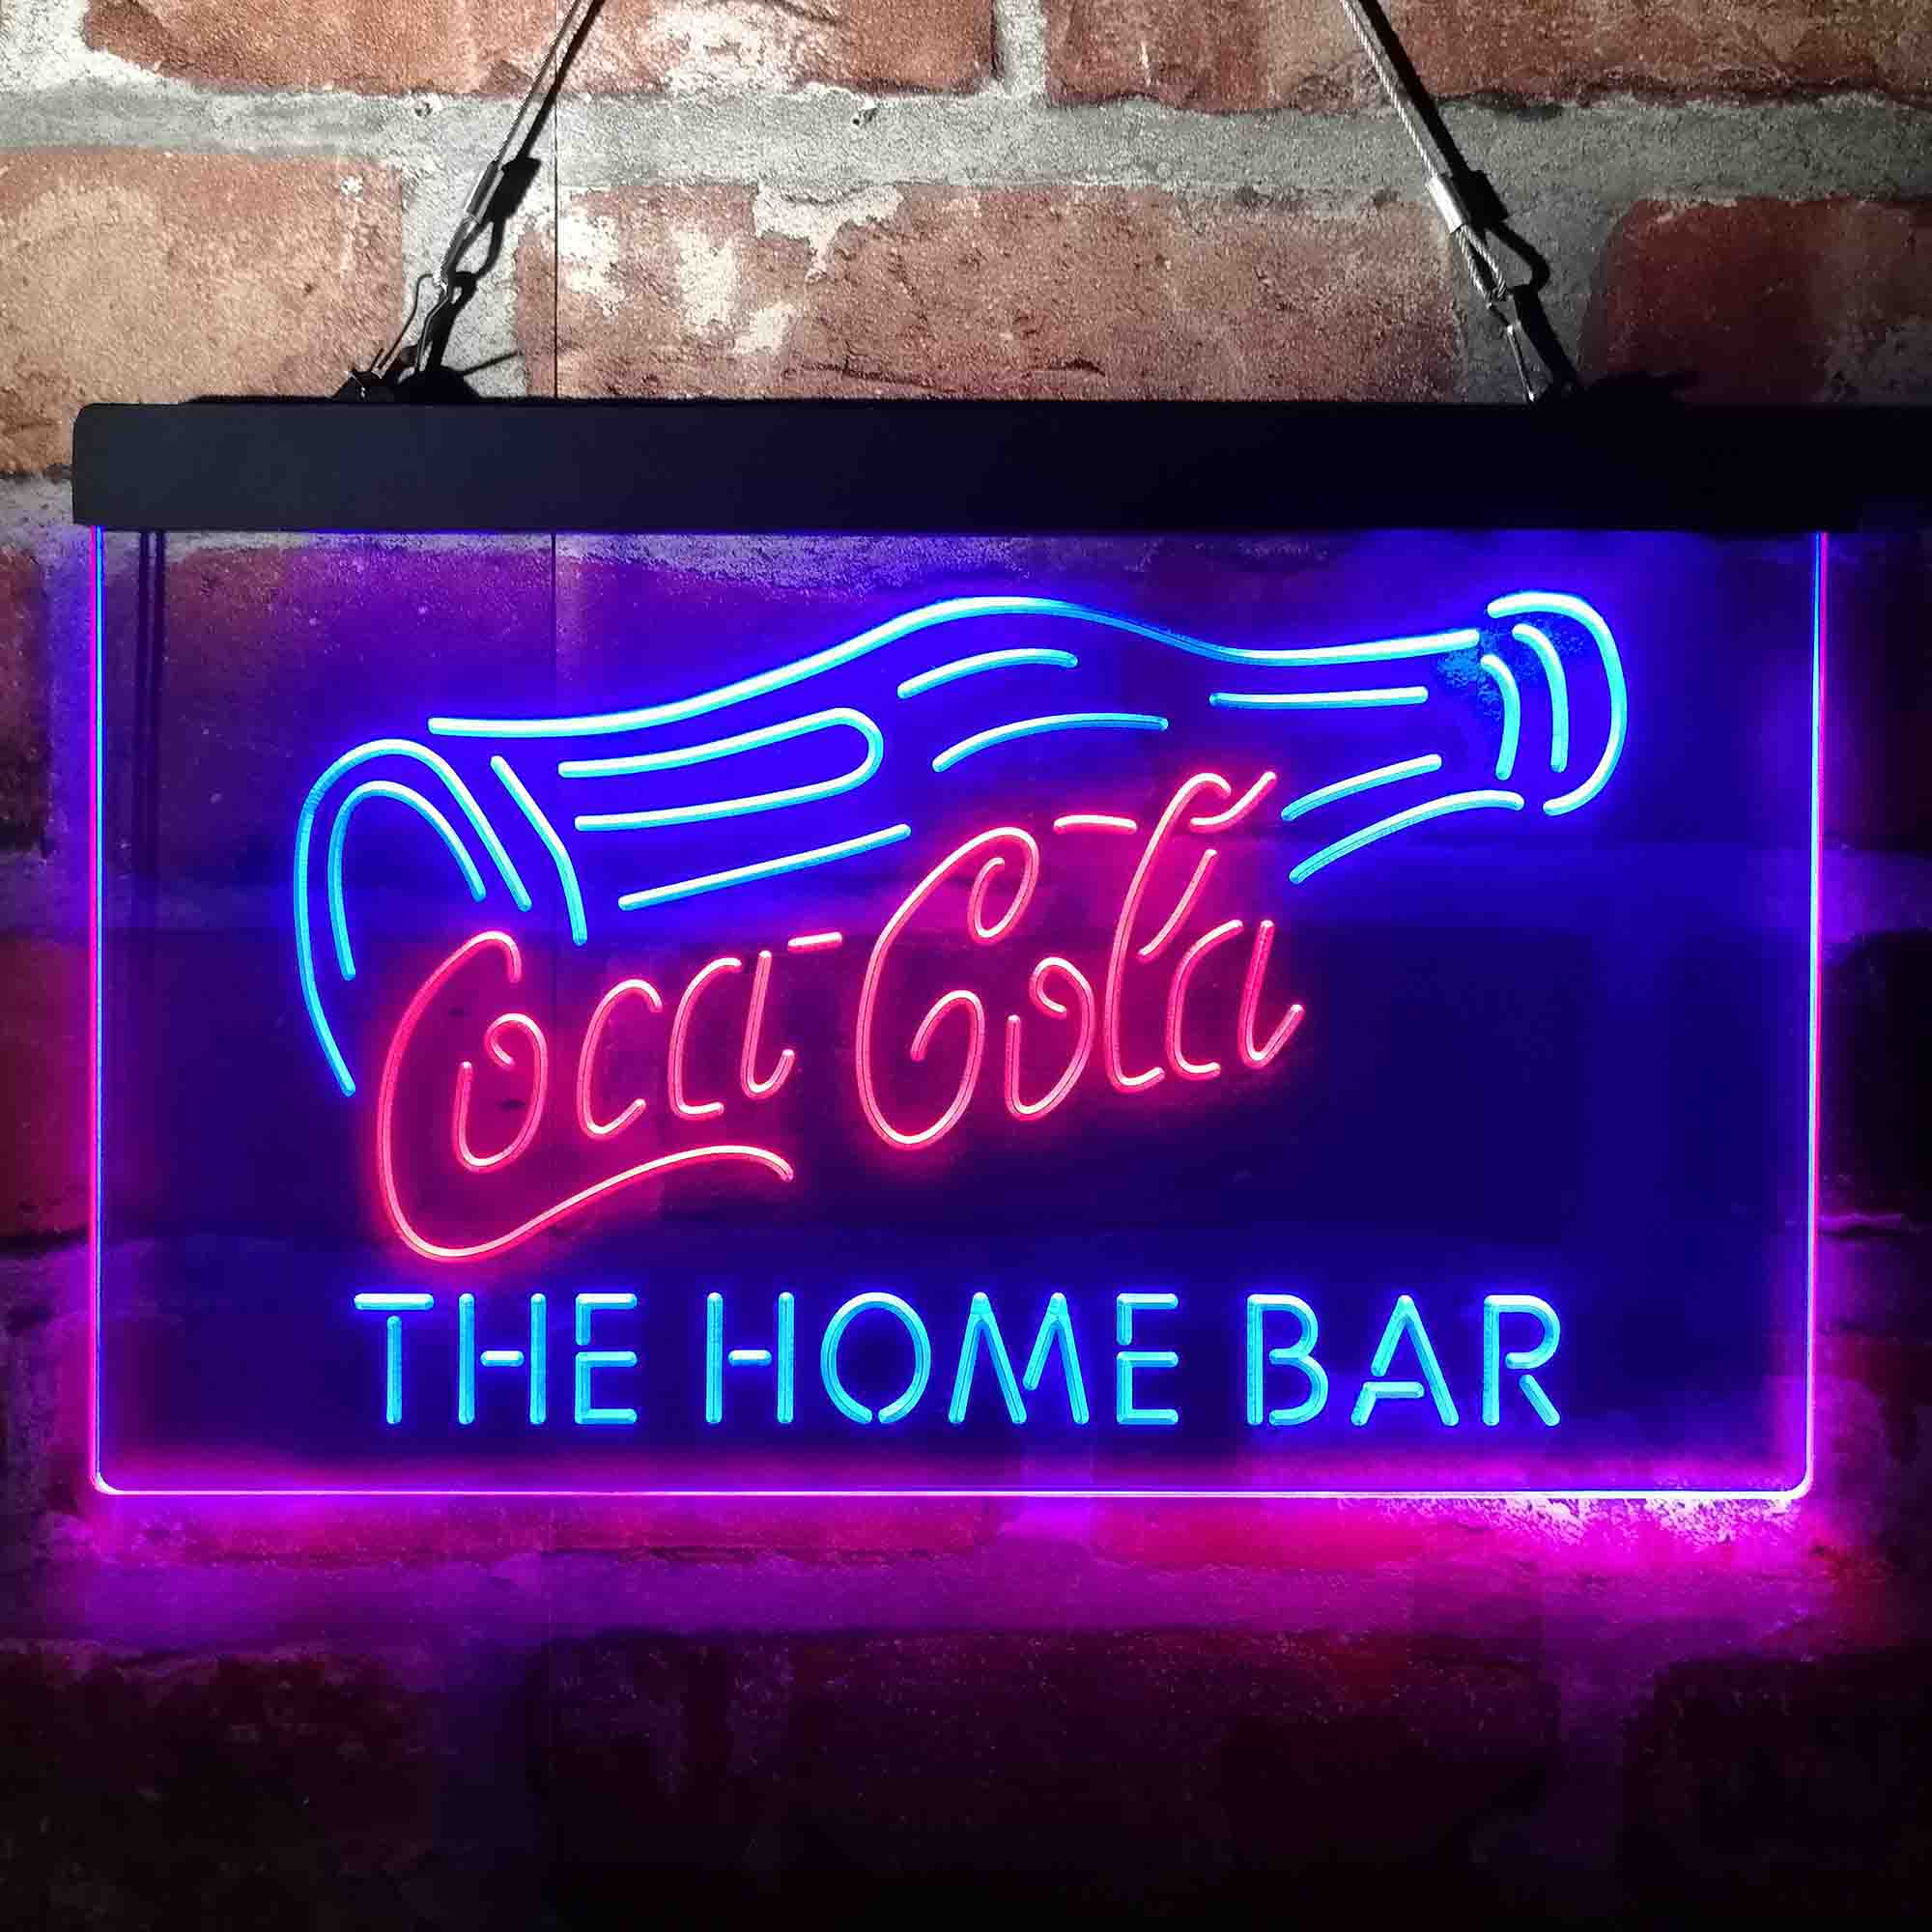 Coca Cola Bottle Drink Bar Custom Personalized Neon-Like LED Sign